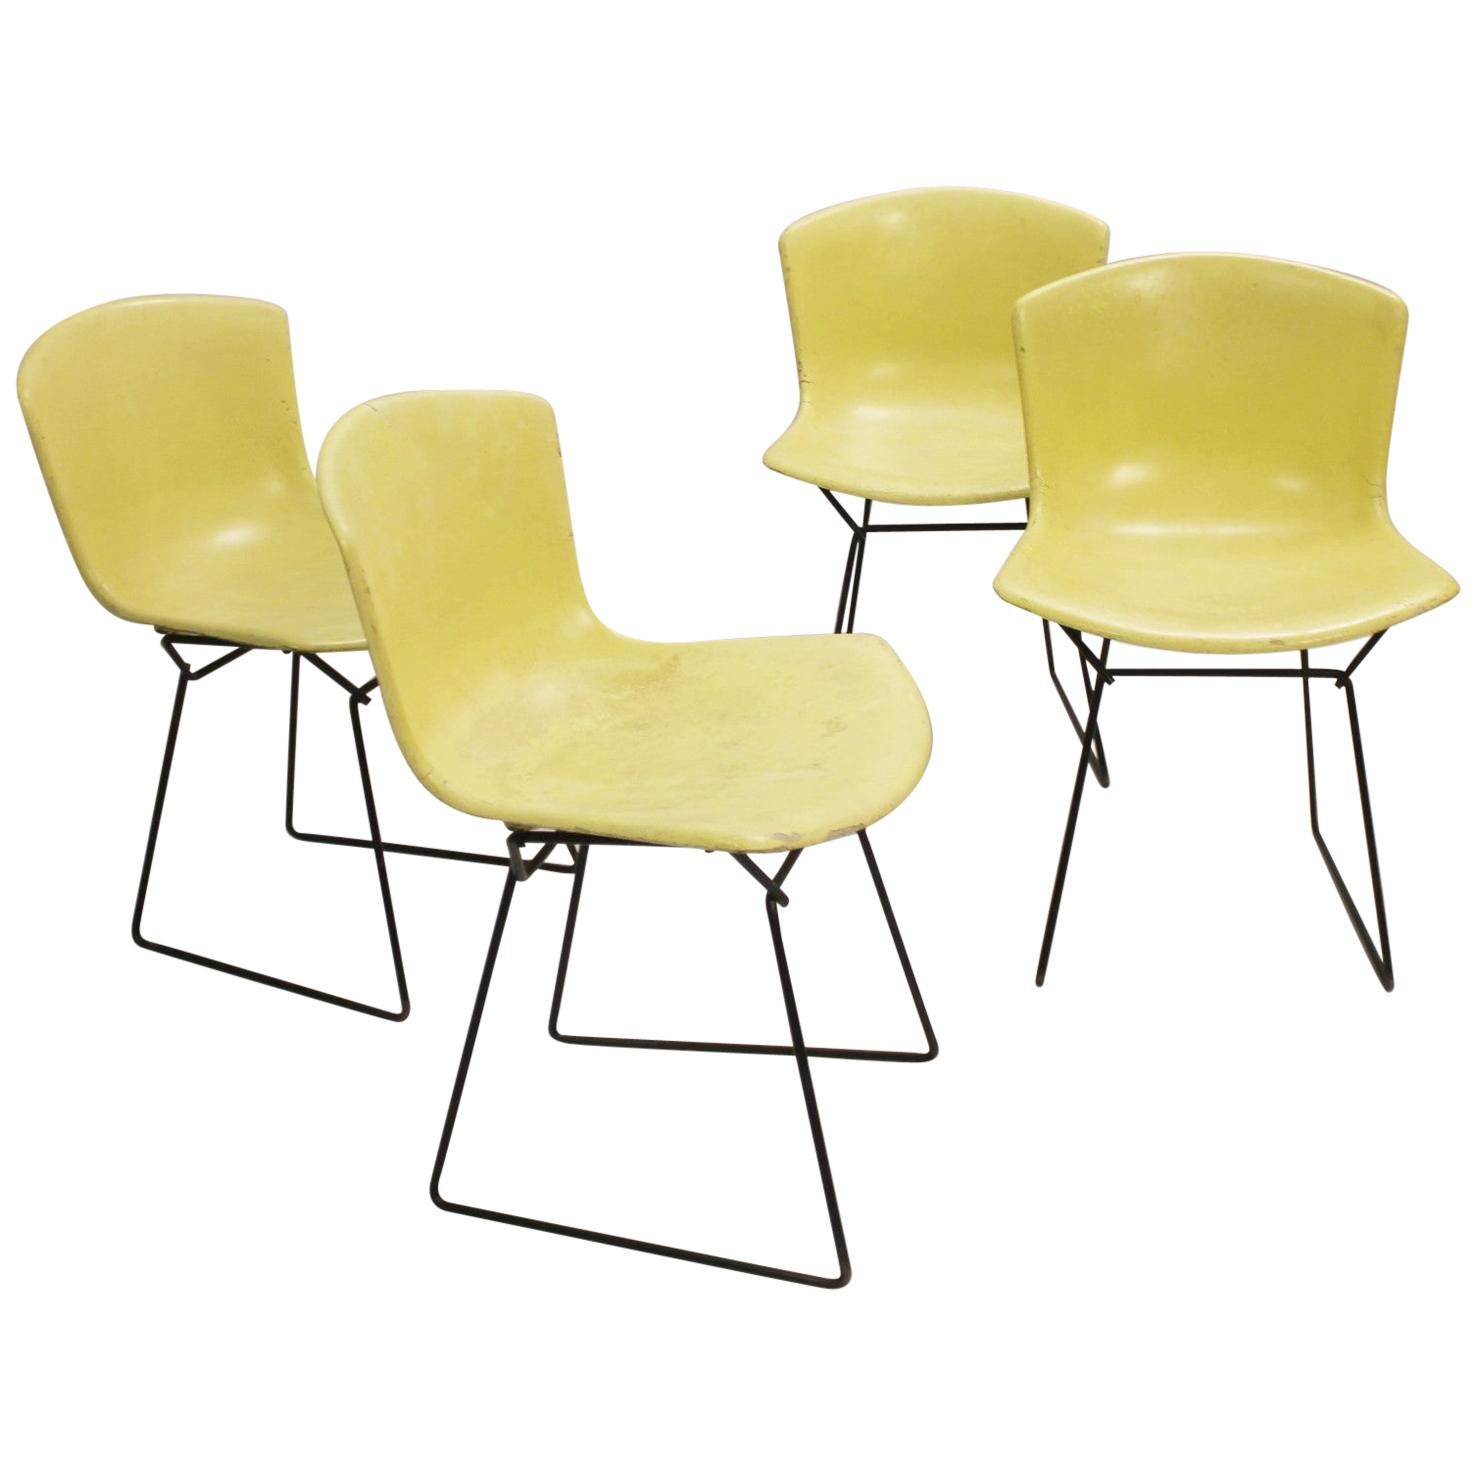 Set of 4 Molded Shell Side Chairs by Harry Bertoia, Fiberglass, Knoll Edition